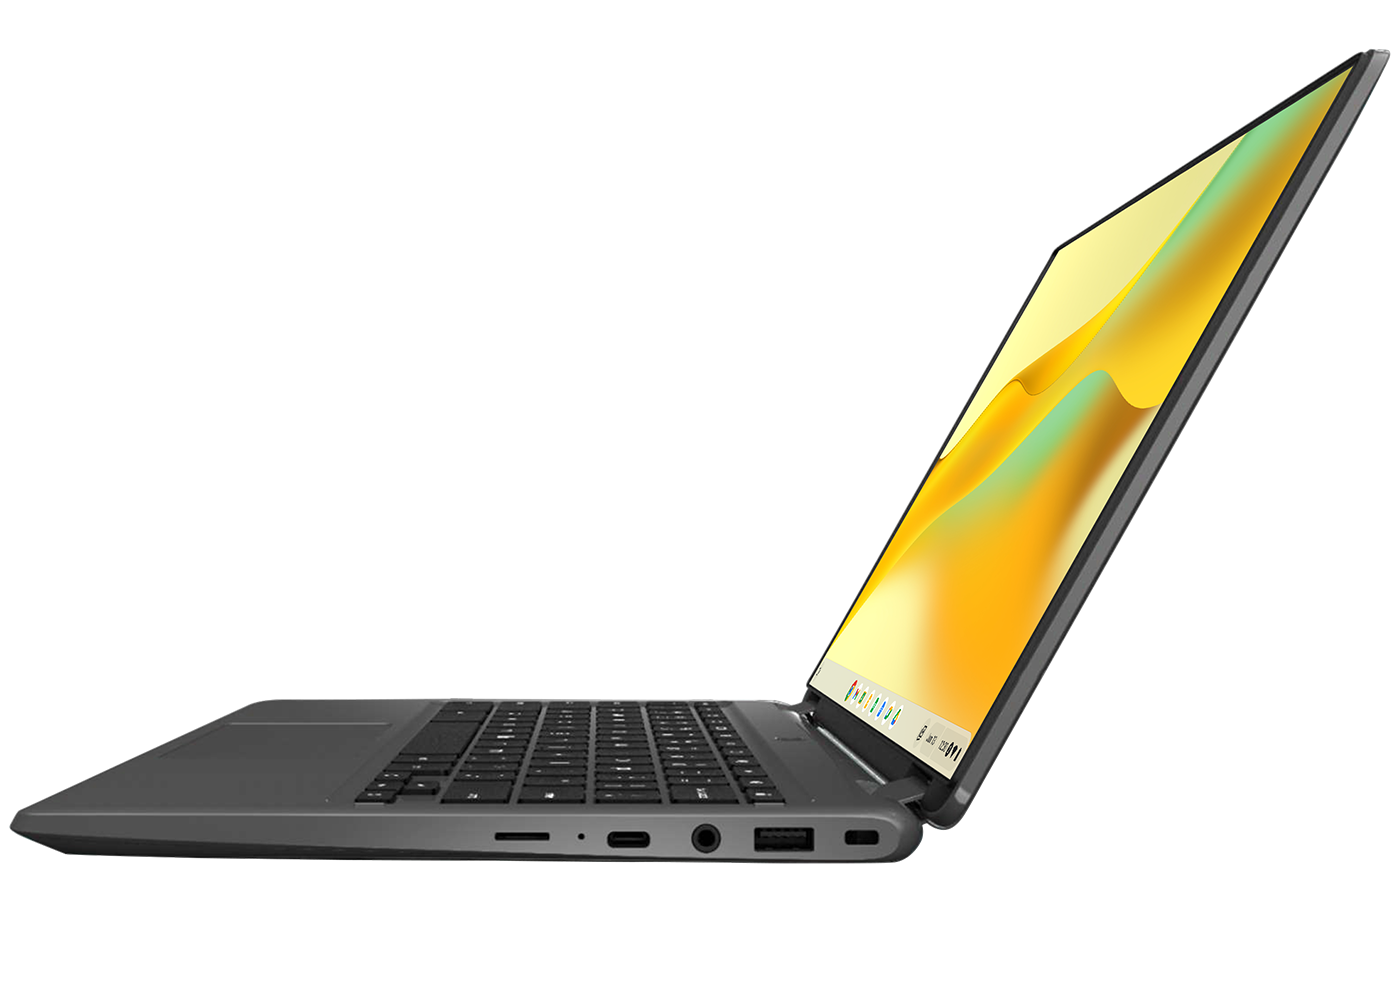 Chromebook device from side profle